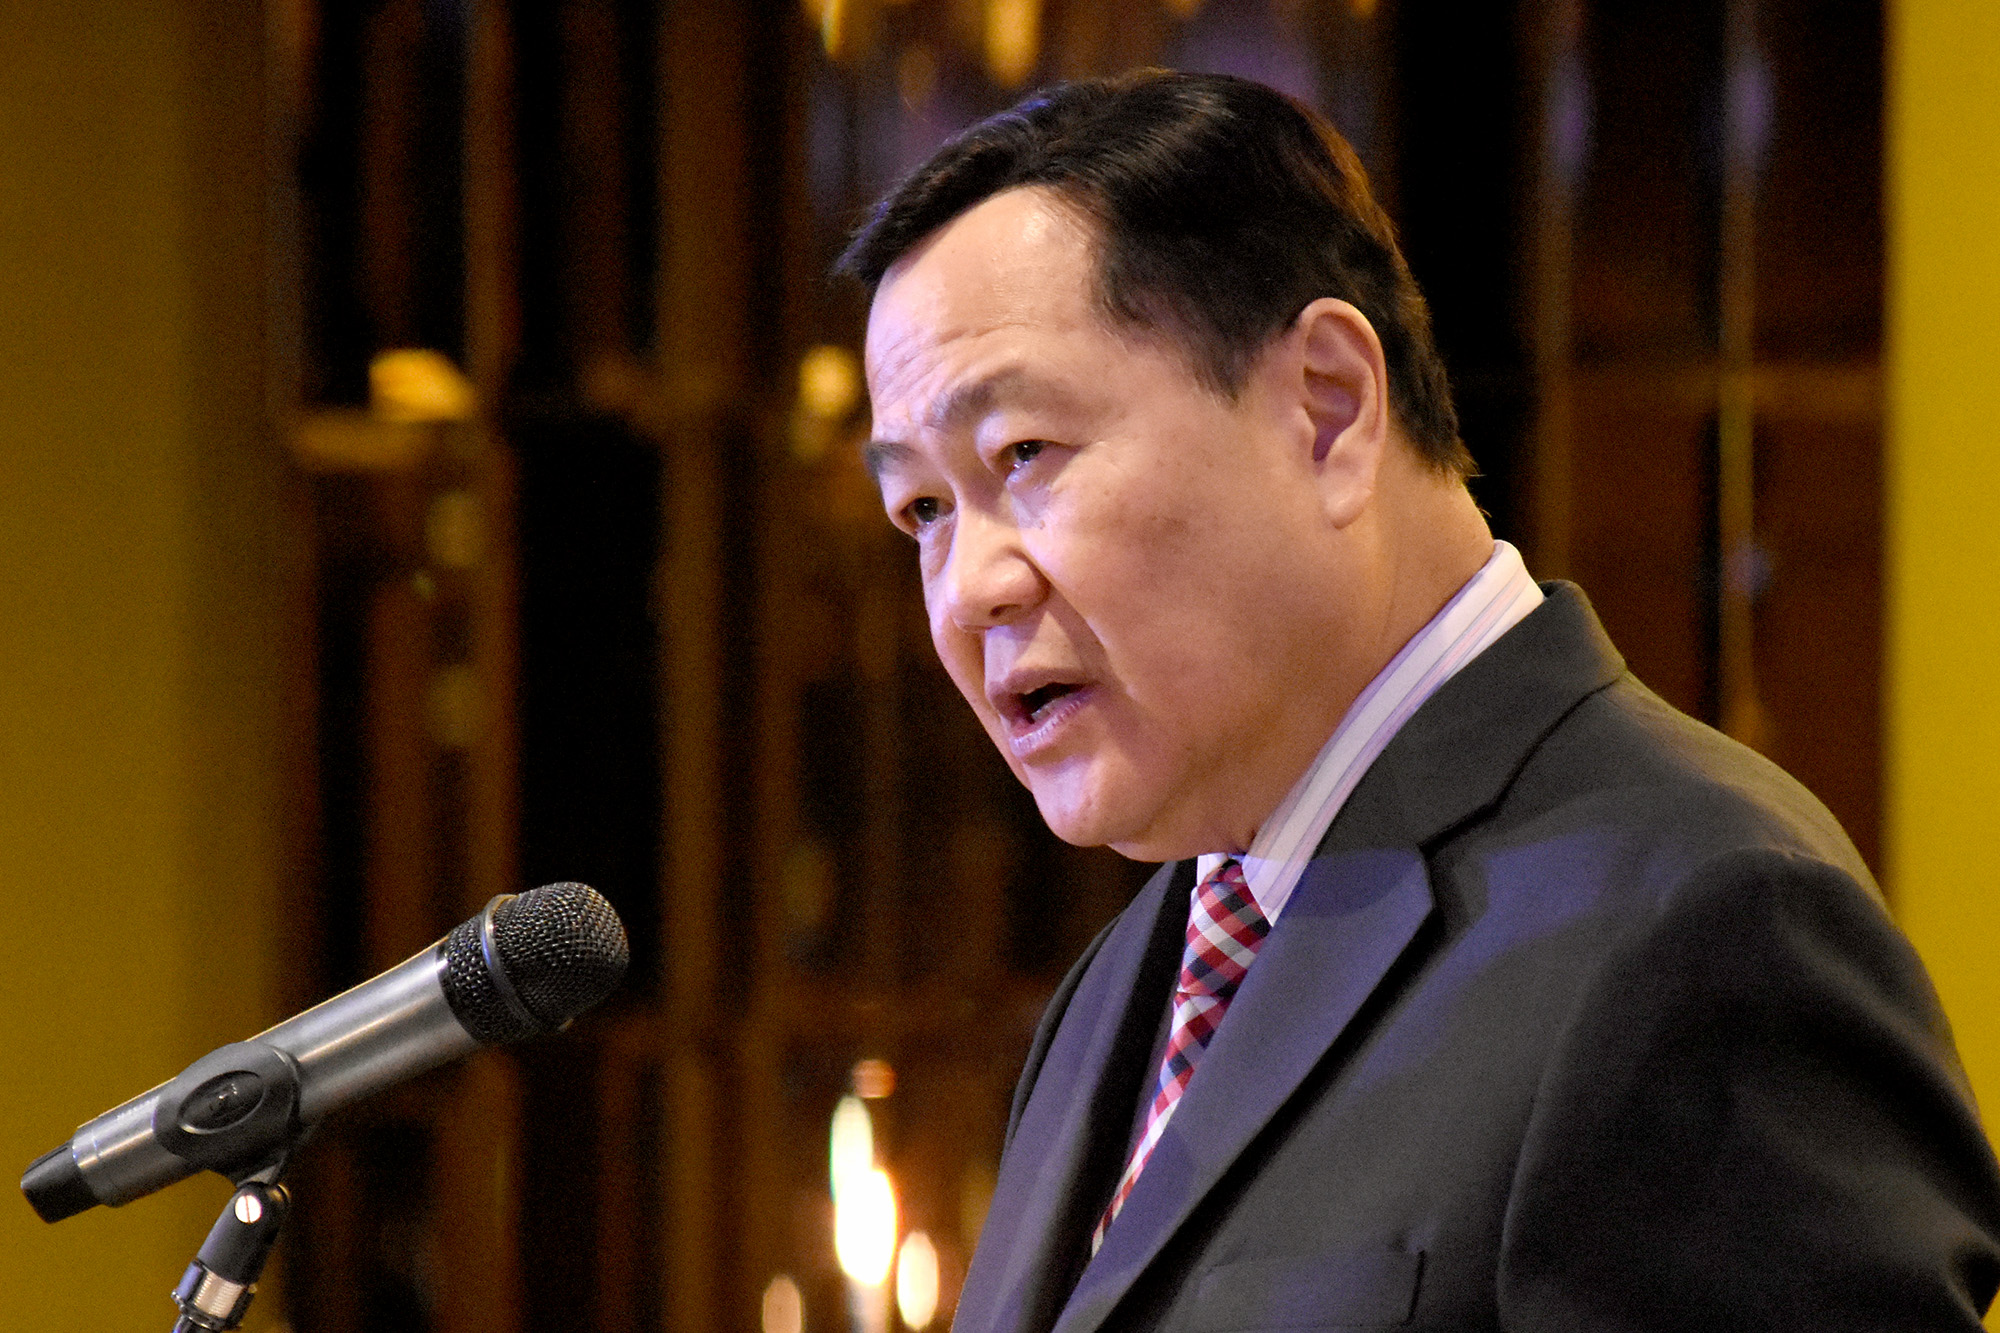 WEST PHILIPPINE SEA. Supreme Court Senior Associate Justice Antonio Carpio says the Philippine government cannot allow China to fish in the West Philippine Sea. Photo by Angie de Silva/Rappler  